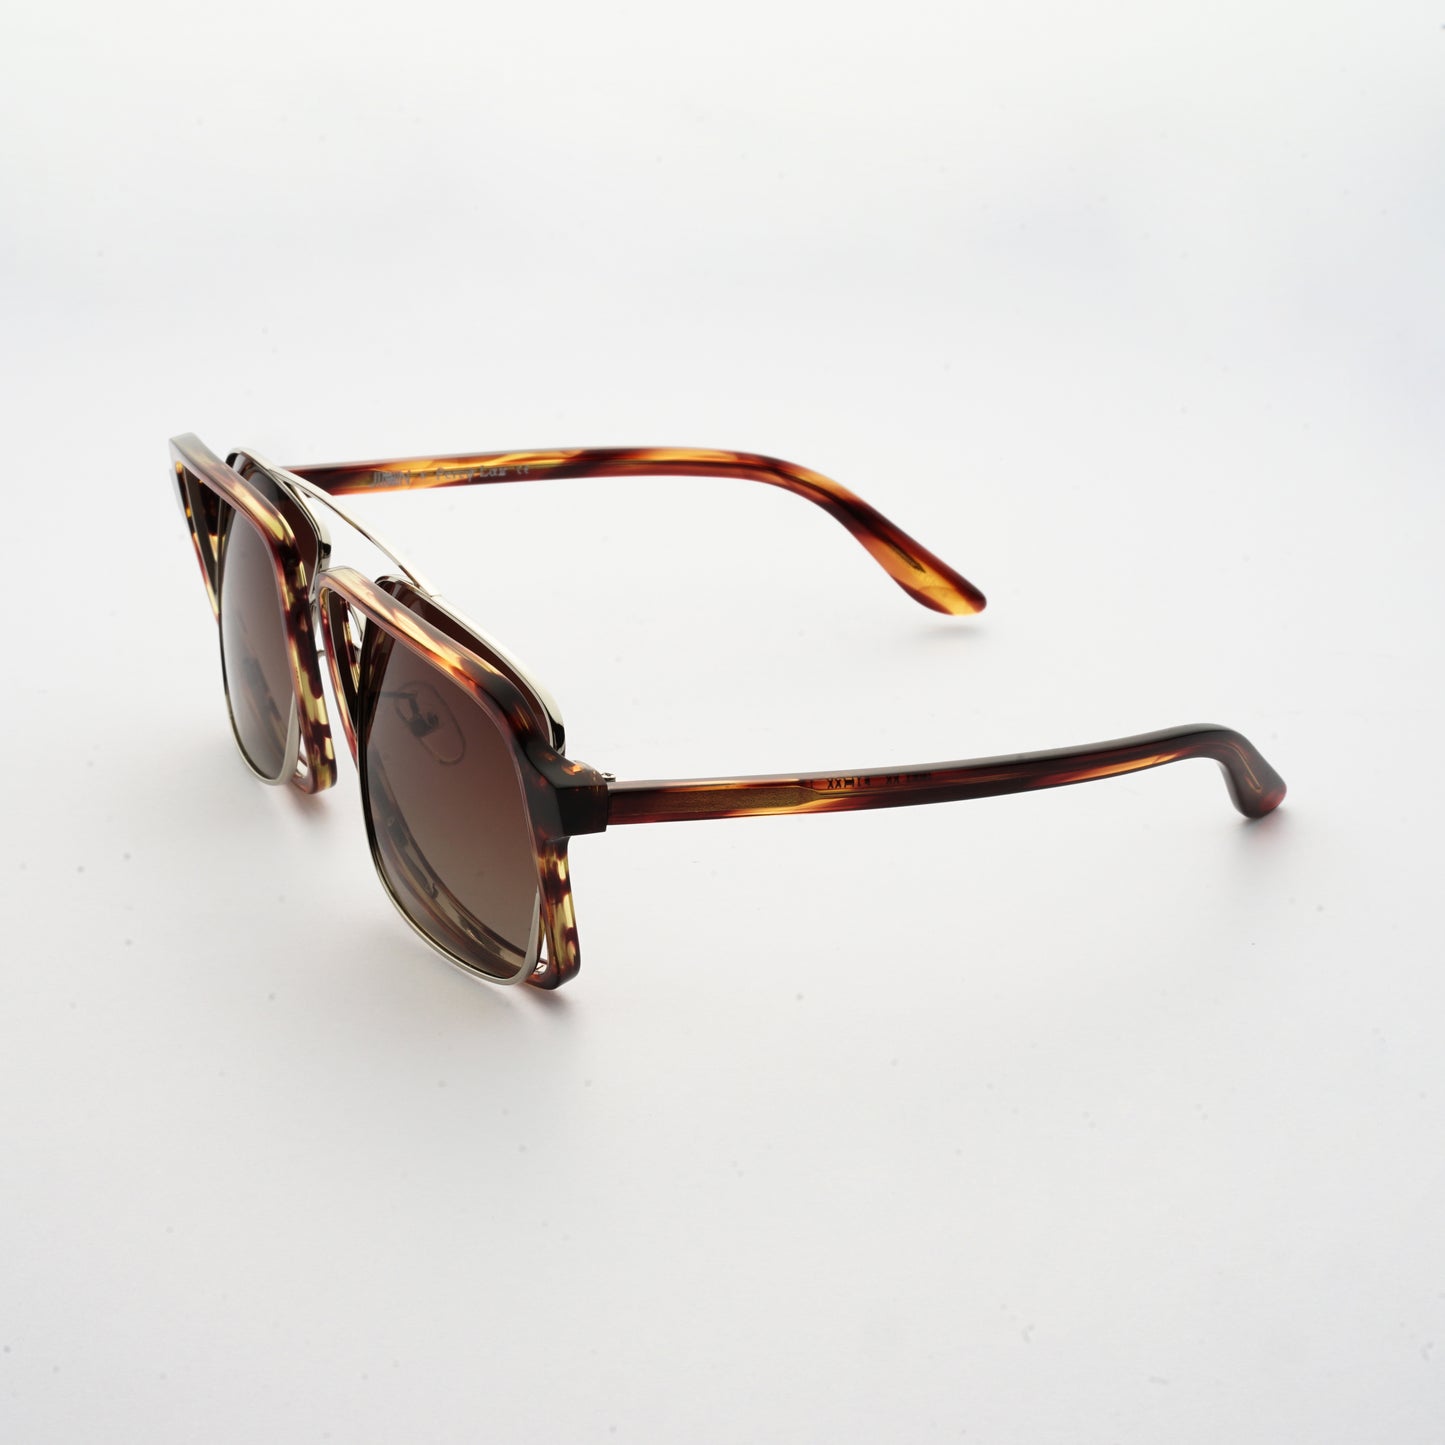 testudinarious acetate frame with crossed gold rims and gradient brown lens 45 angled